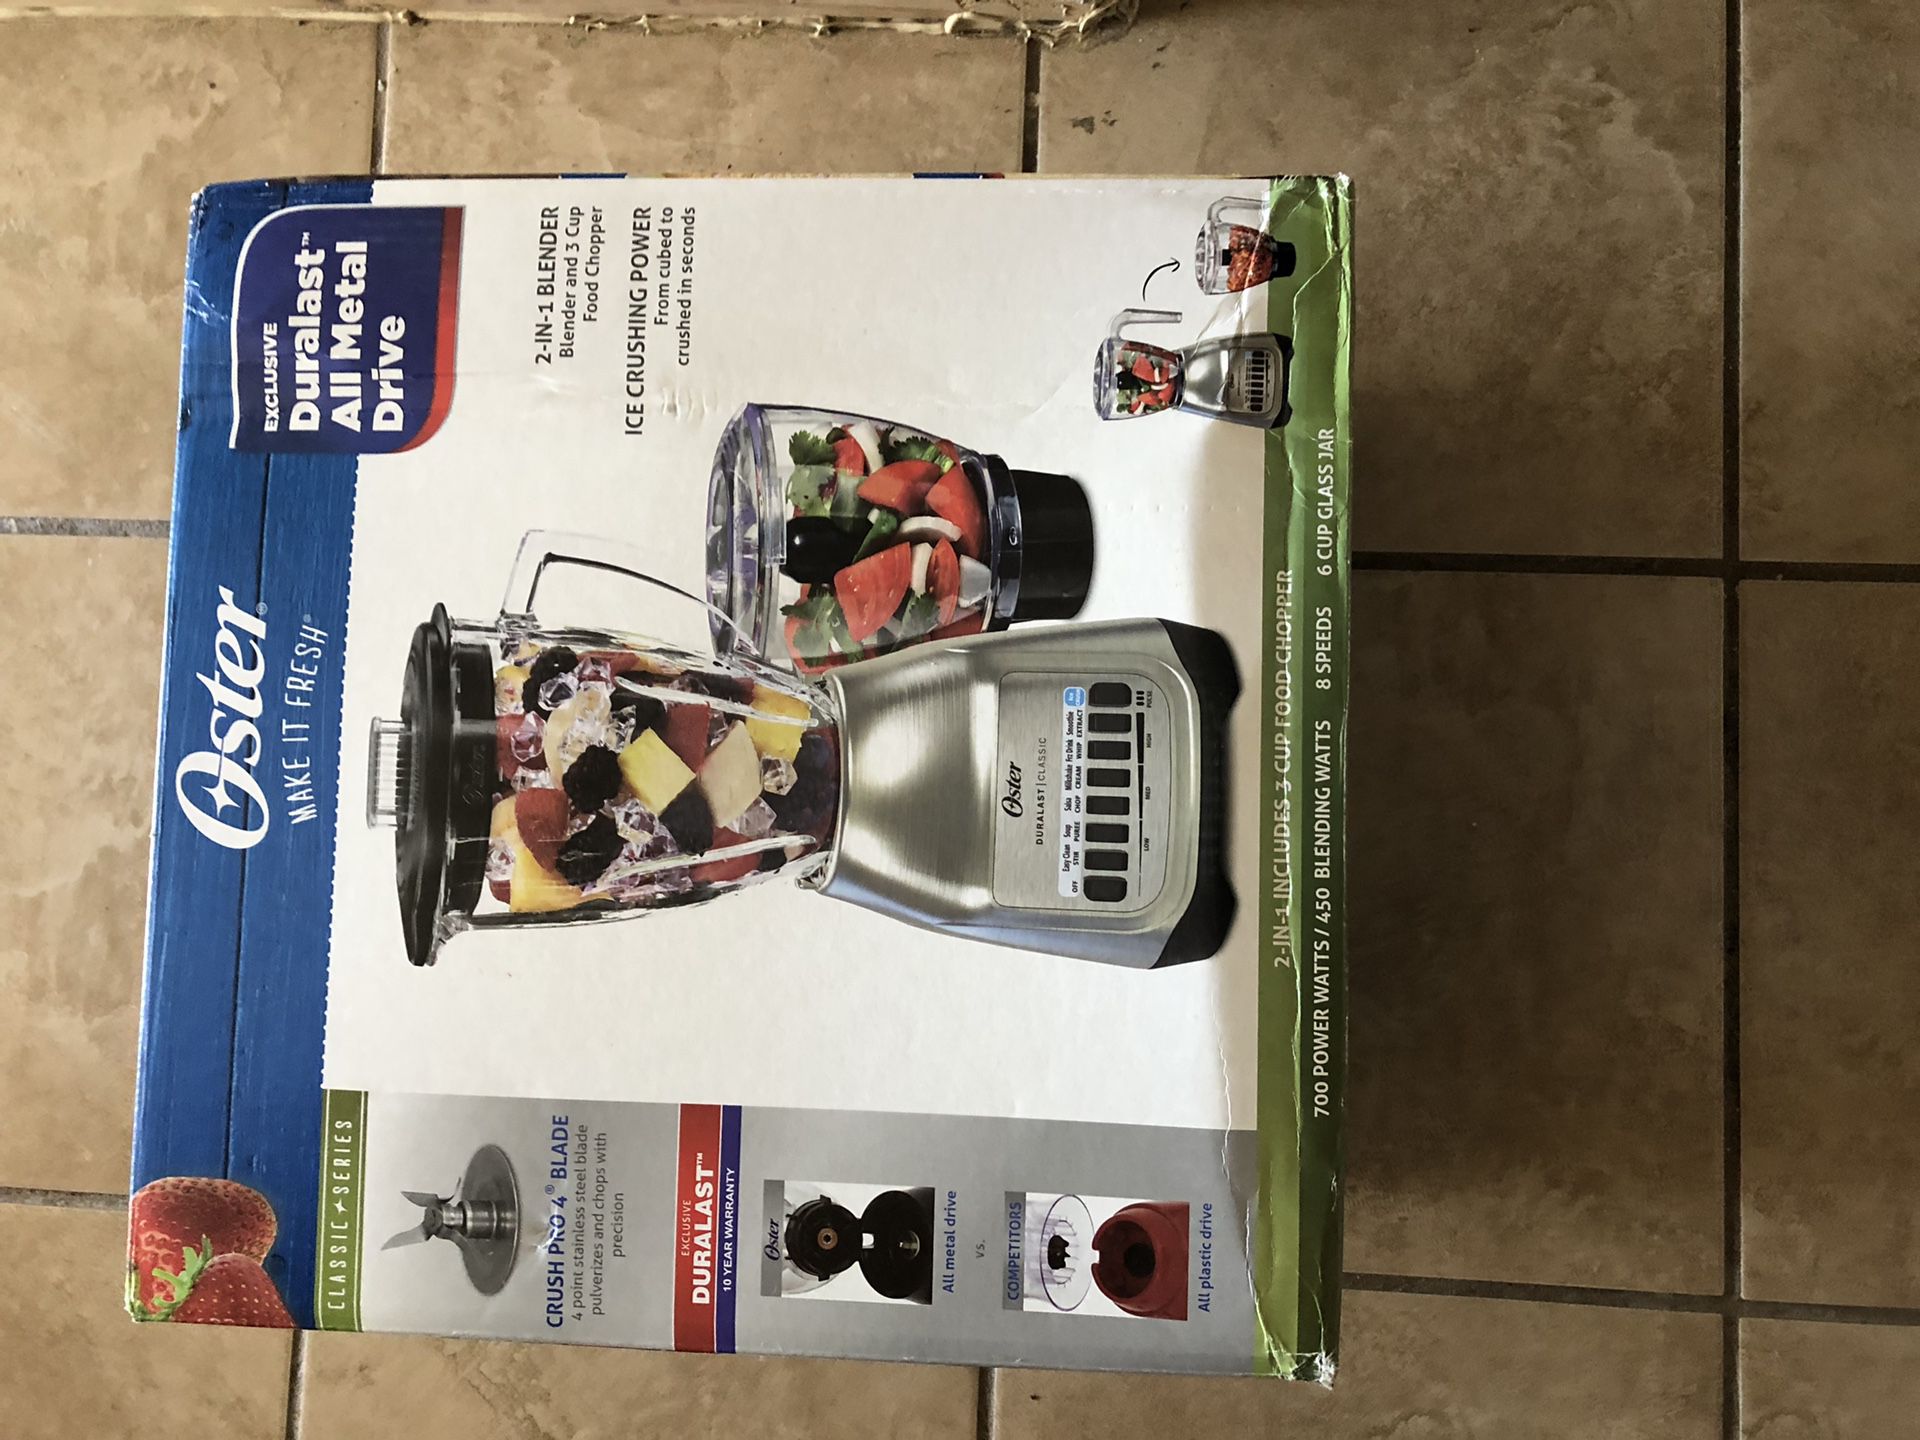 Brand new blender combo make me an offer need to sell